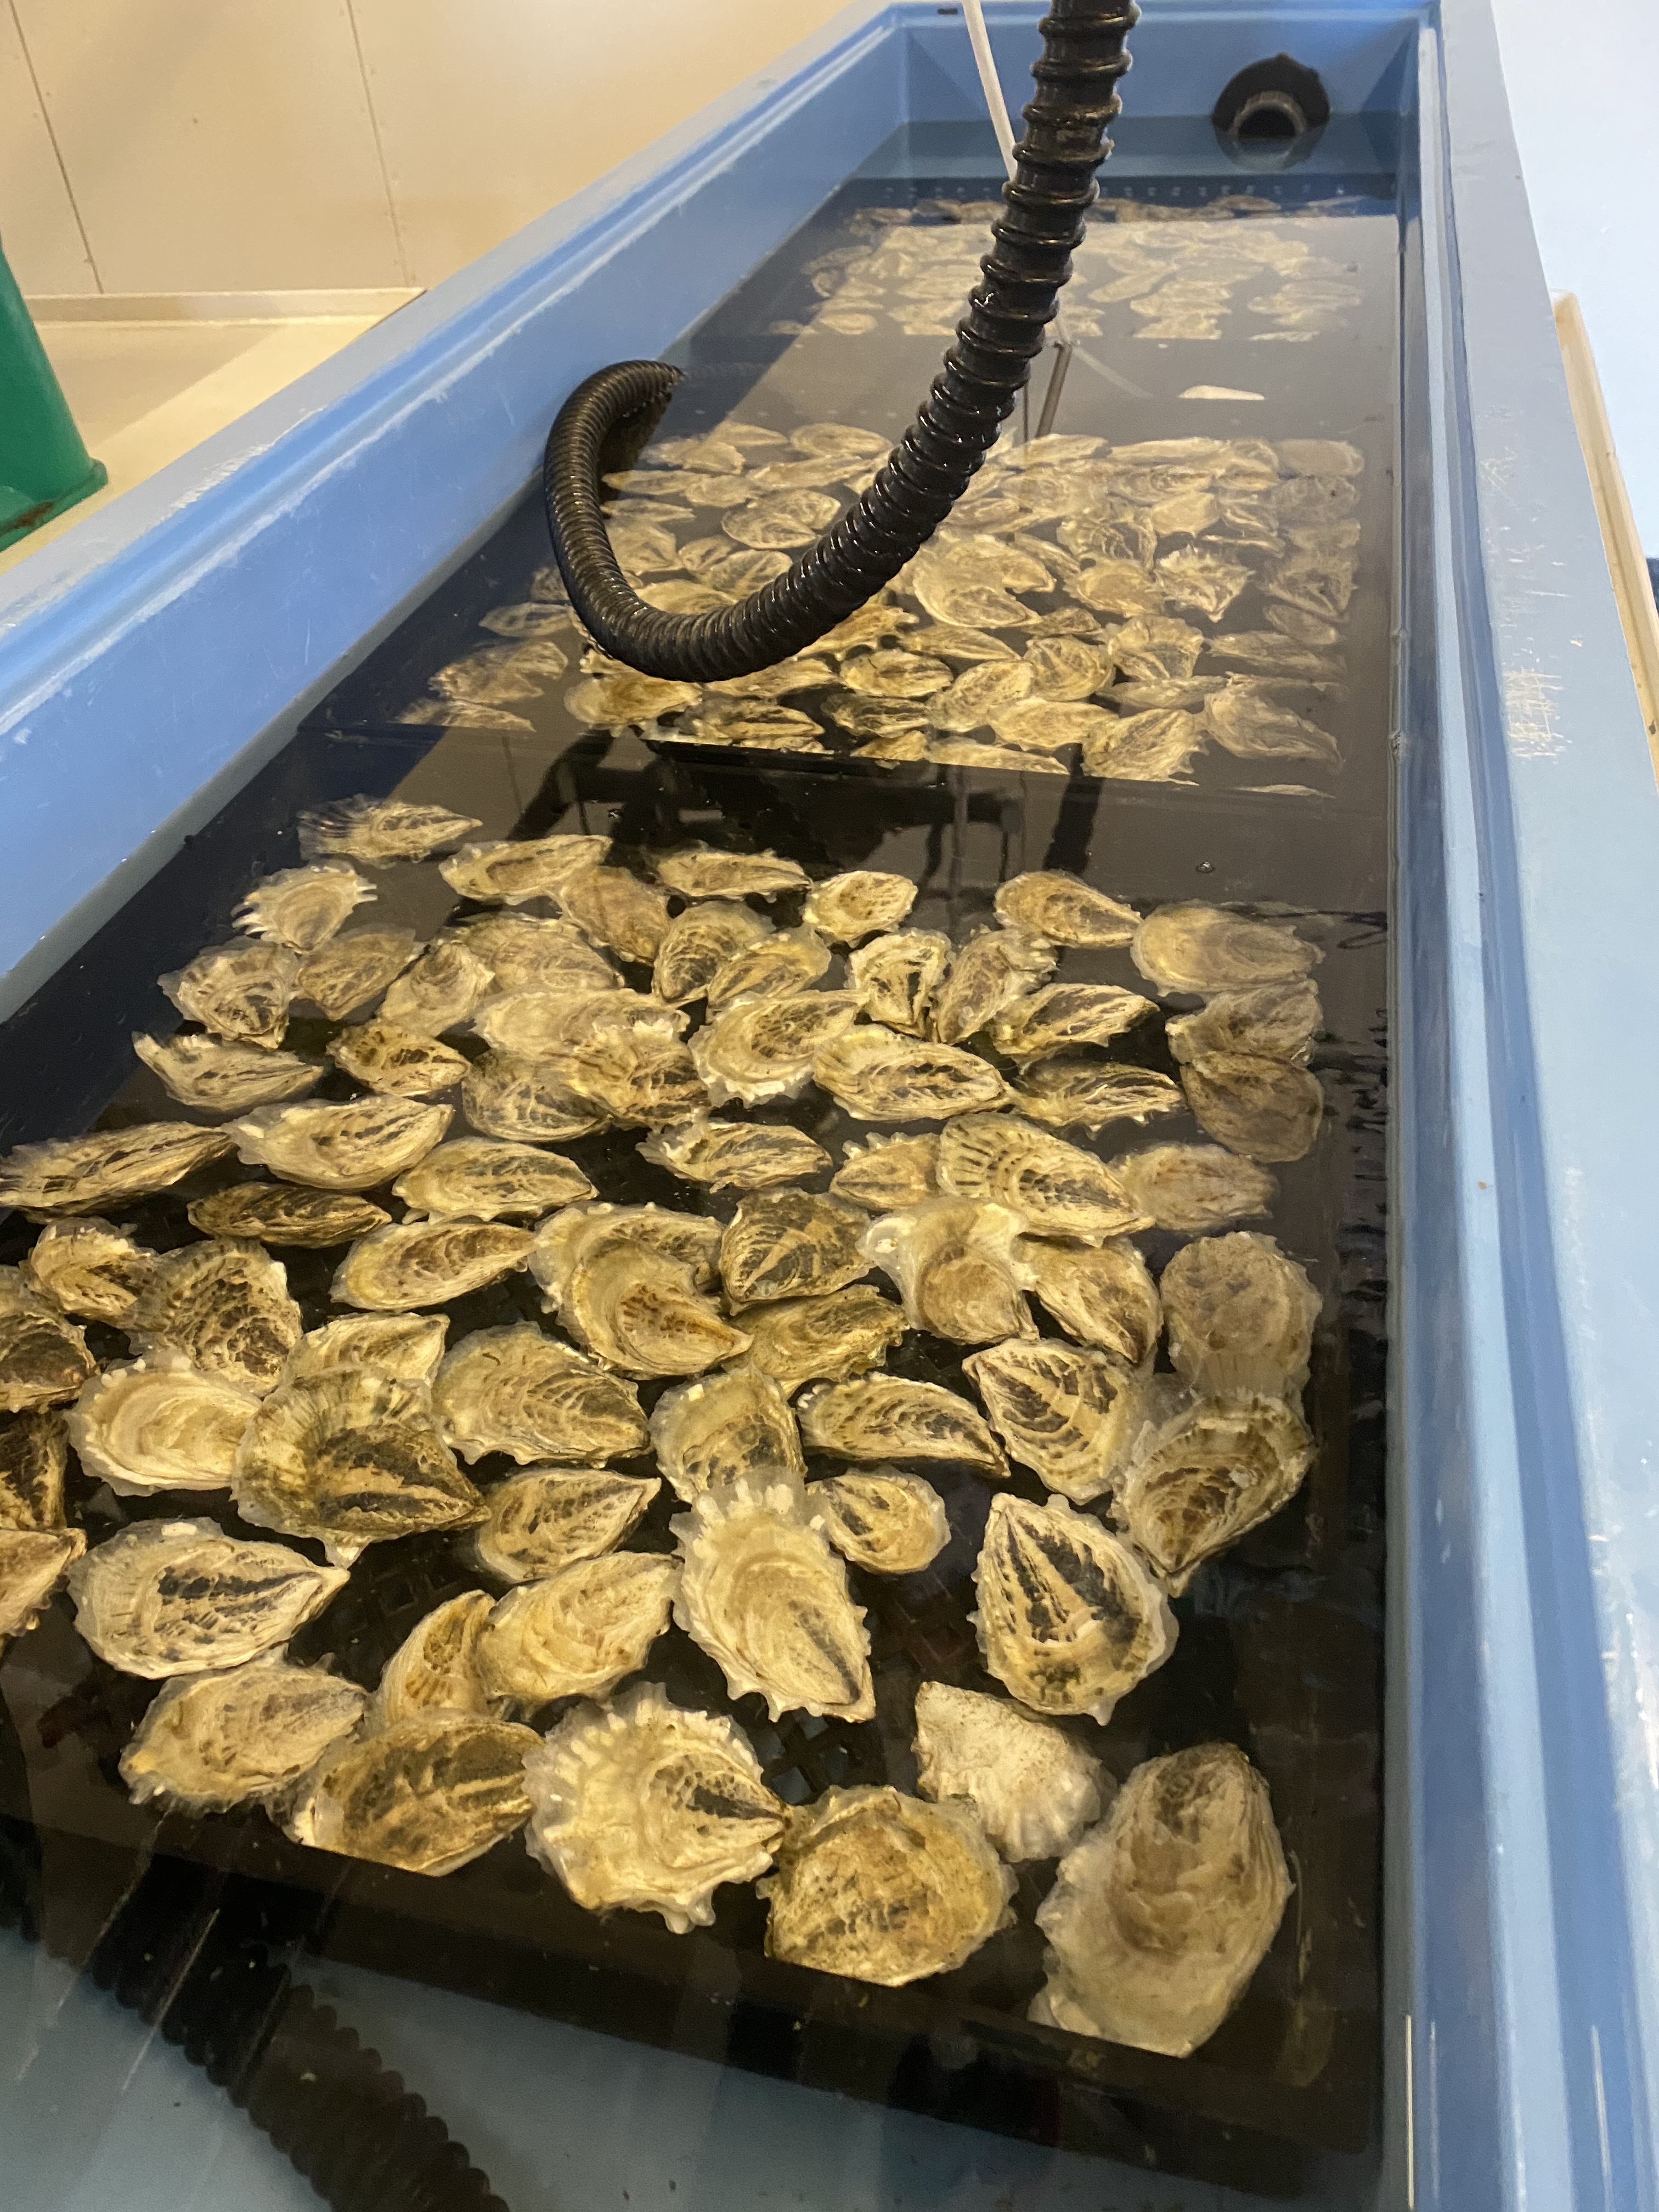 These oysters are being raised in tanks full of sea water at the Cal Poly Pier to measure how fast they grow